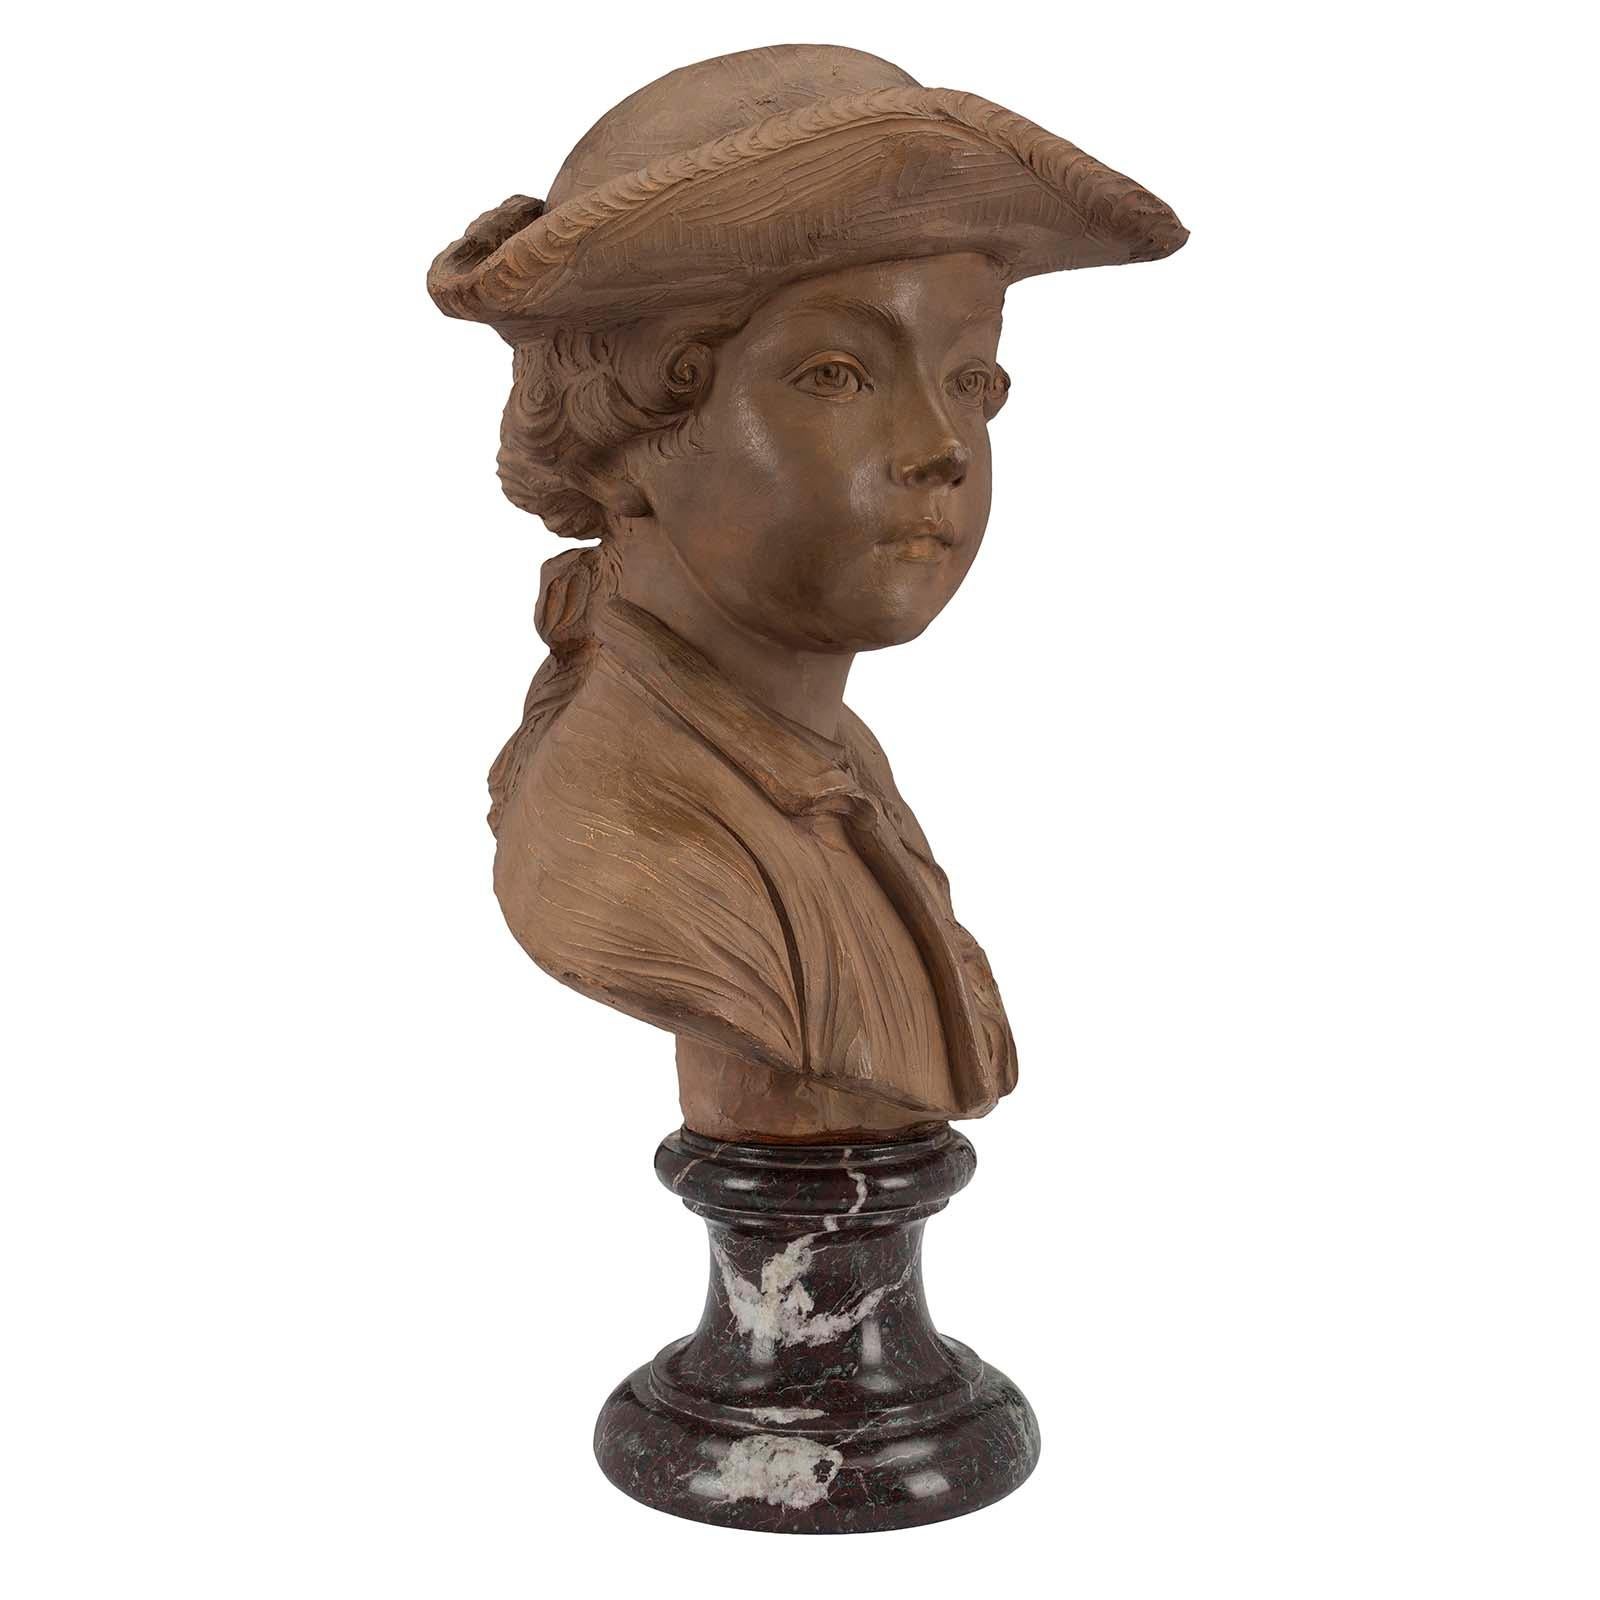 French 19th Century Louis XVI Style Terracotta Bust of a Young Boy Signed Houdon For Sale 2